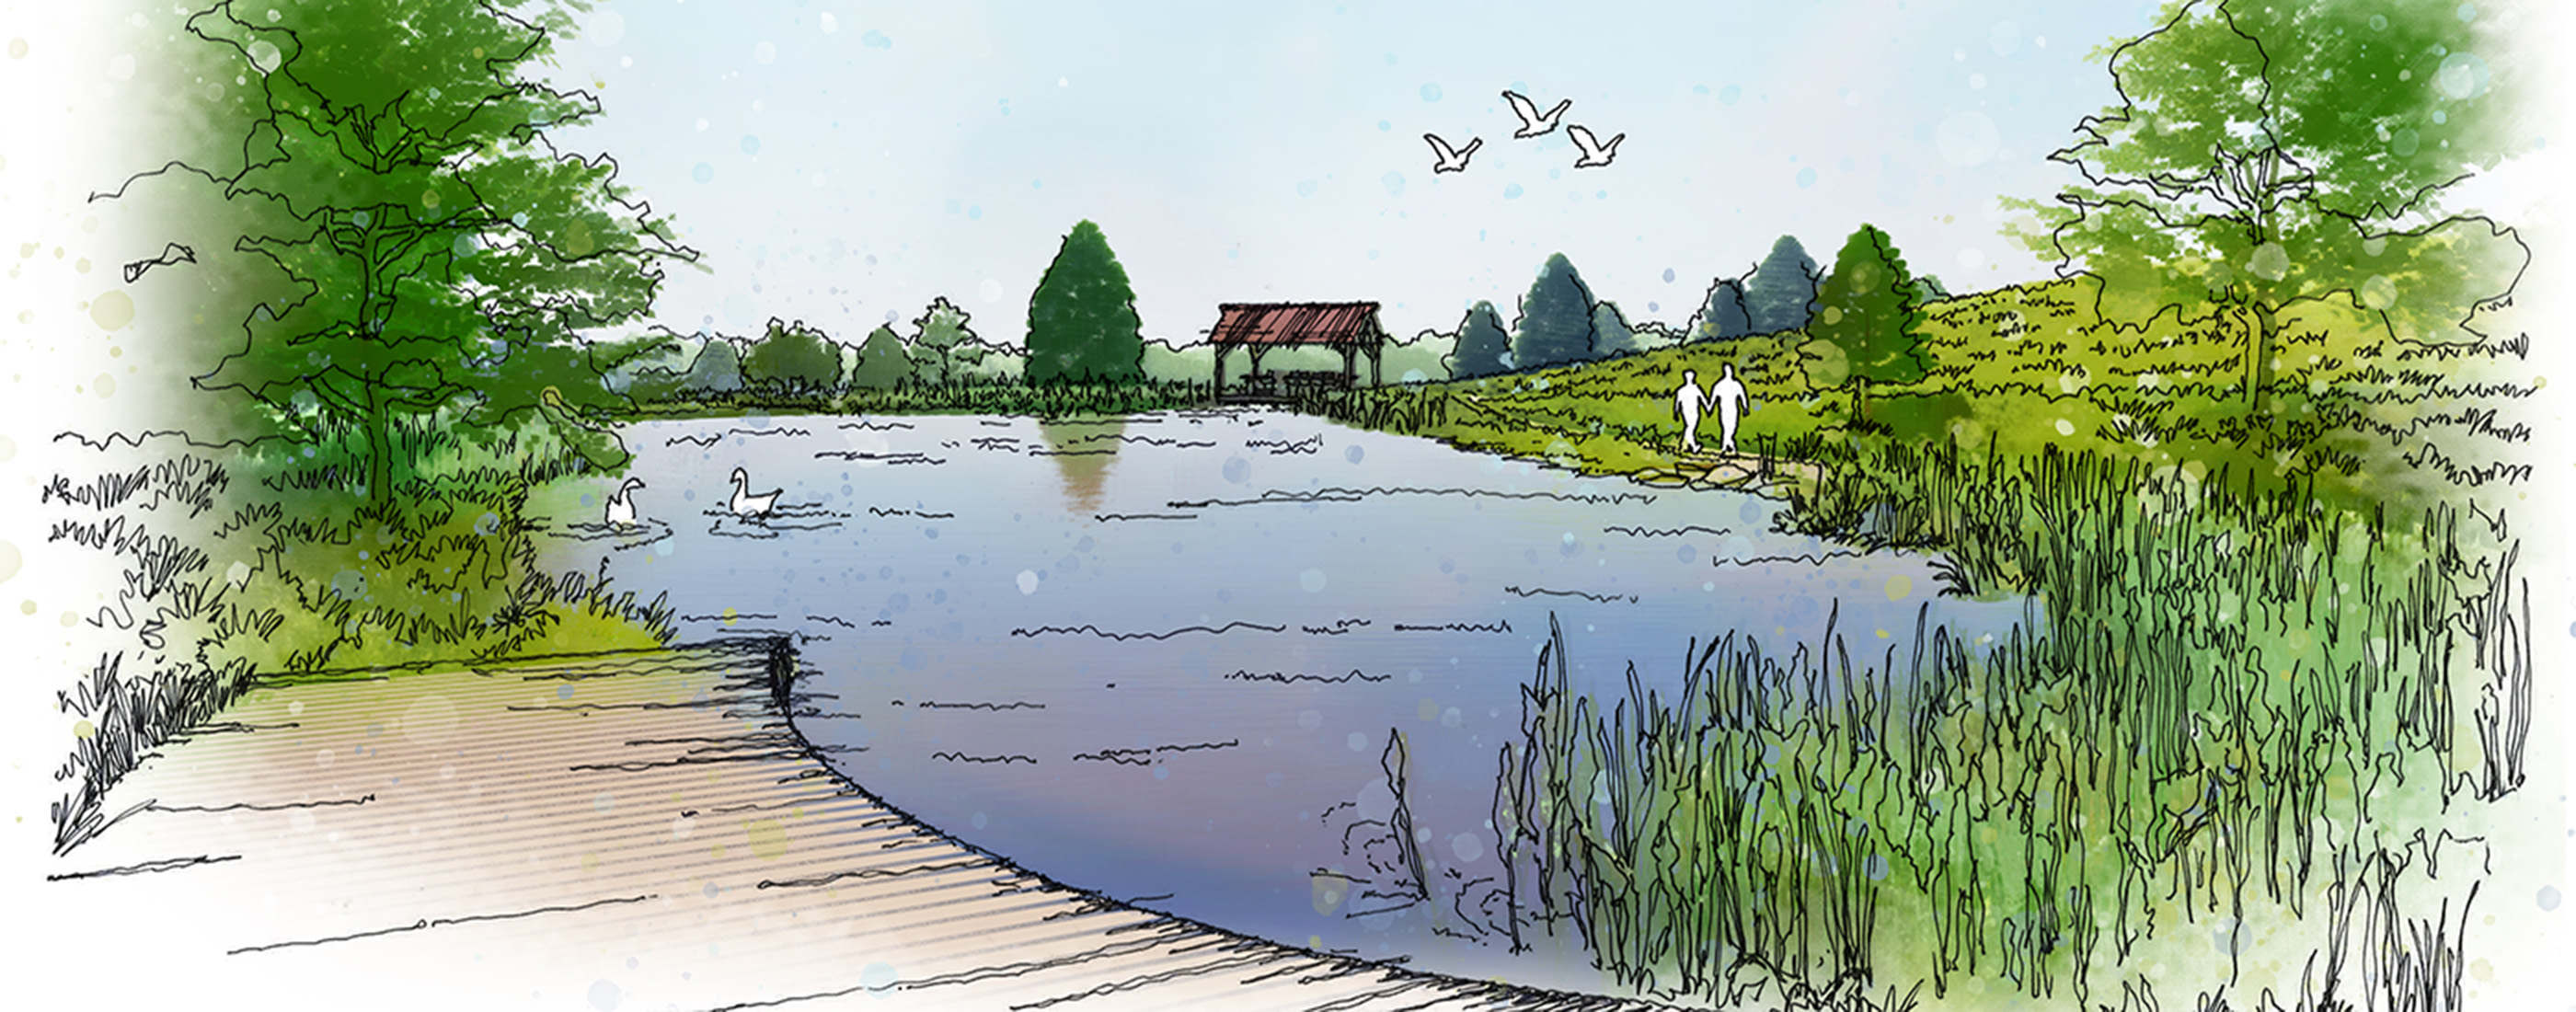 Makers Mark Star Hill Farms rendering Upland Pond